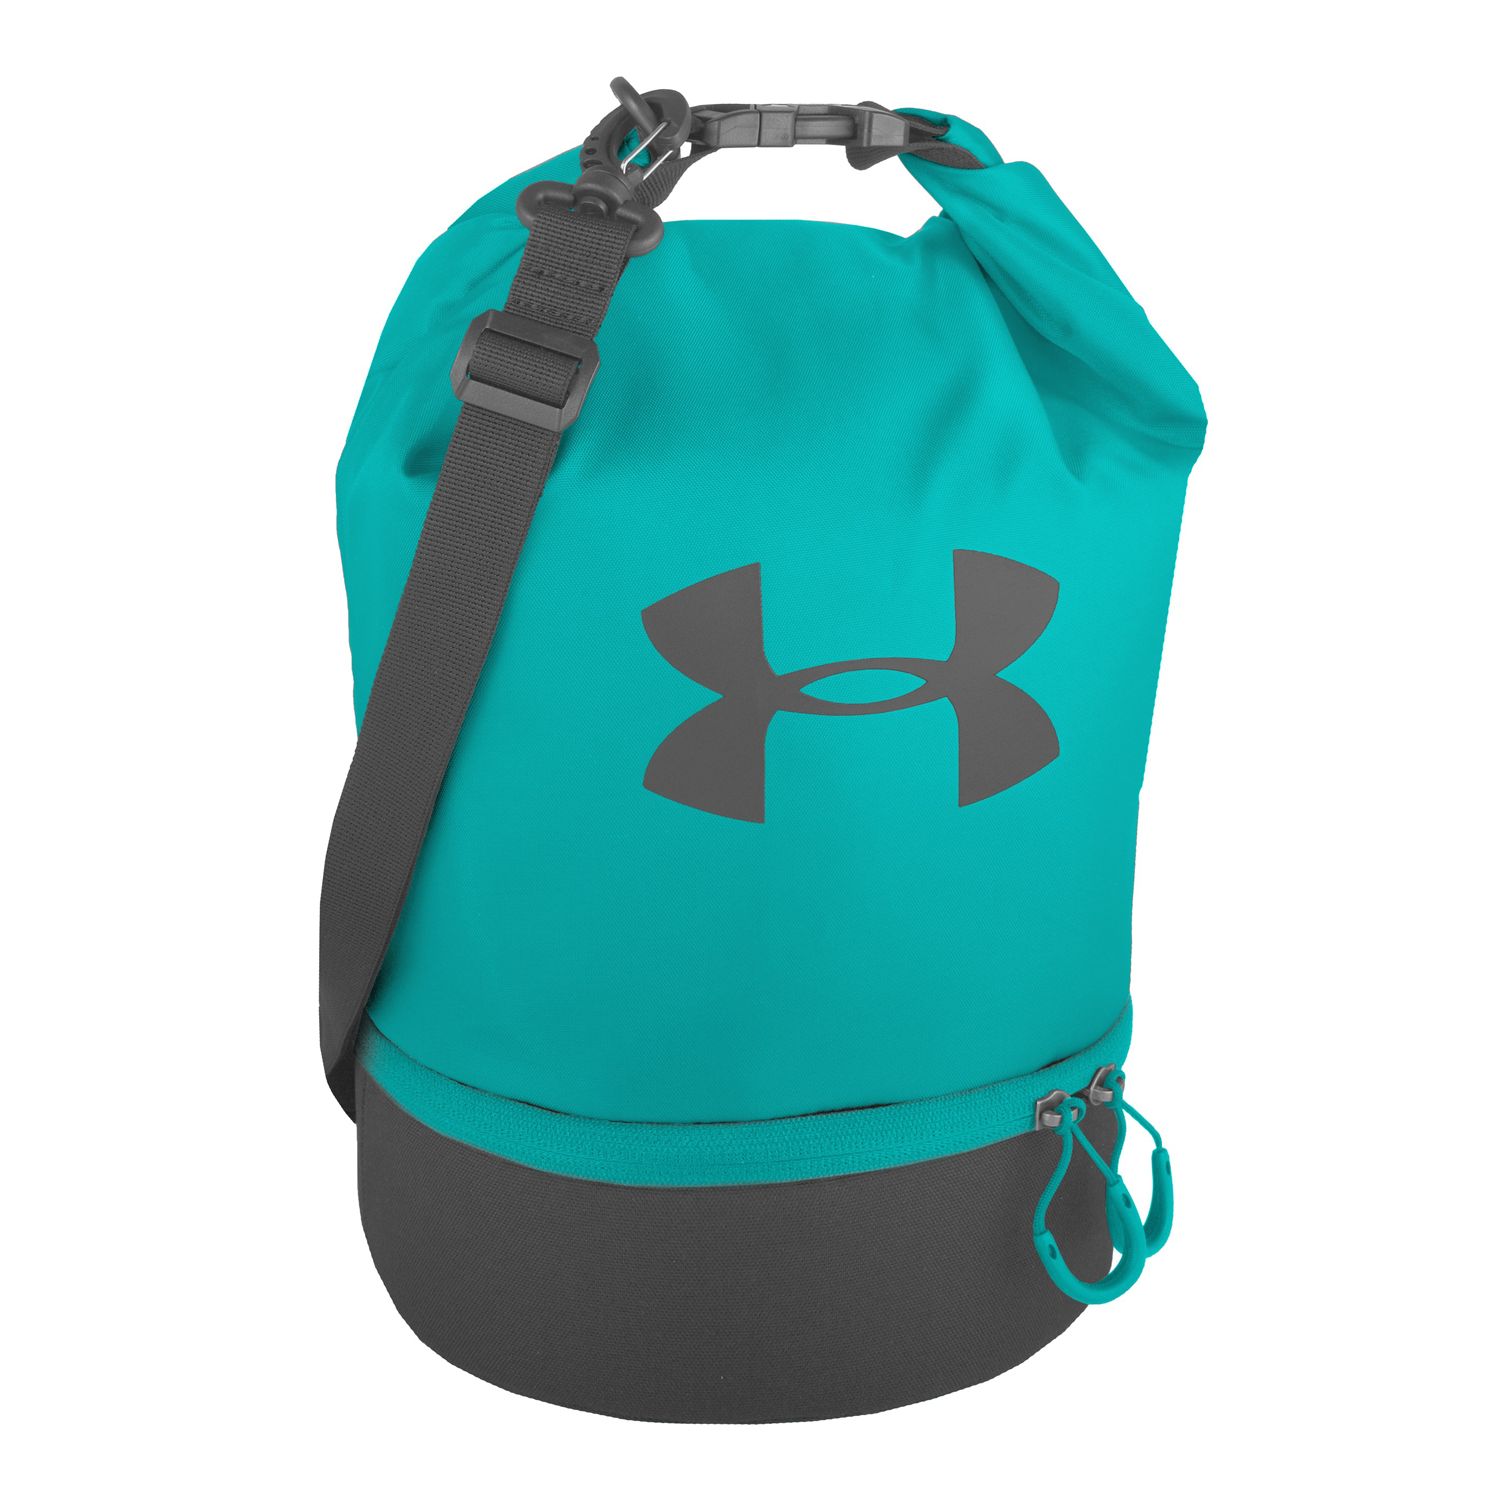 under armour backpacks with matching lunch boxes